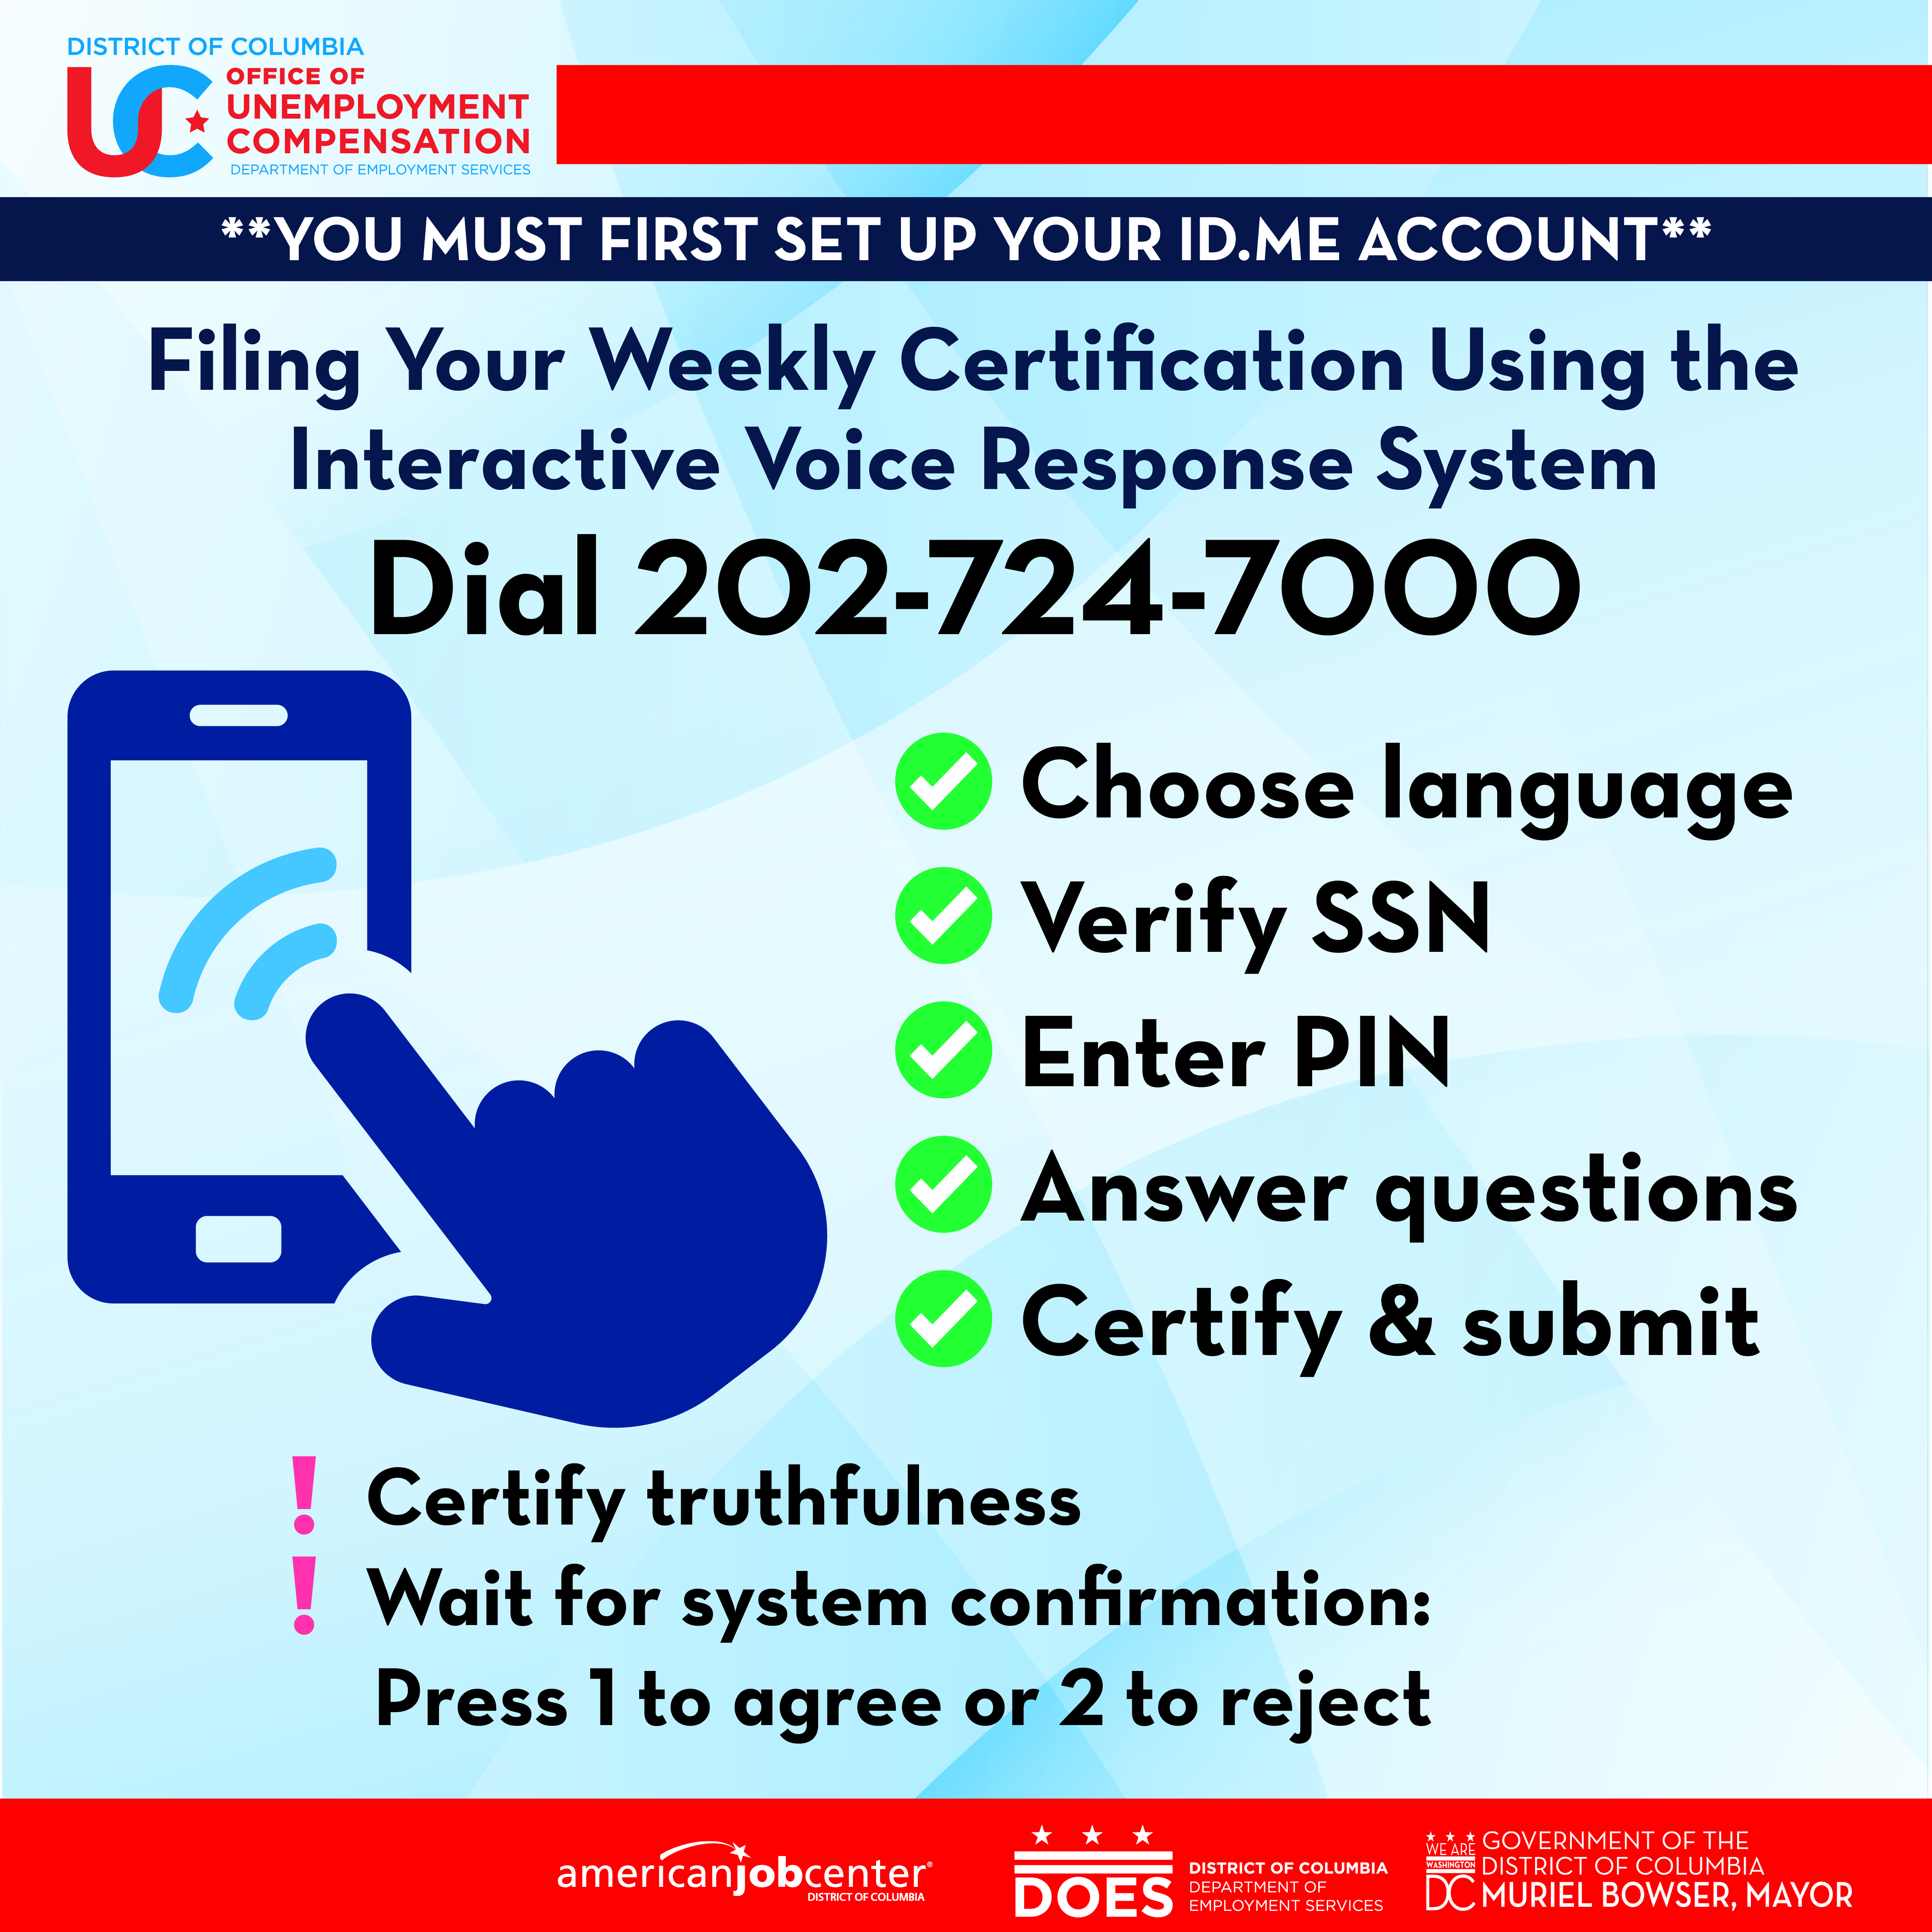 File Your Weekly Certification 